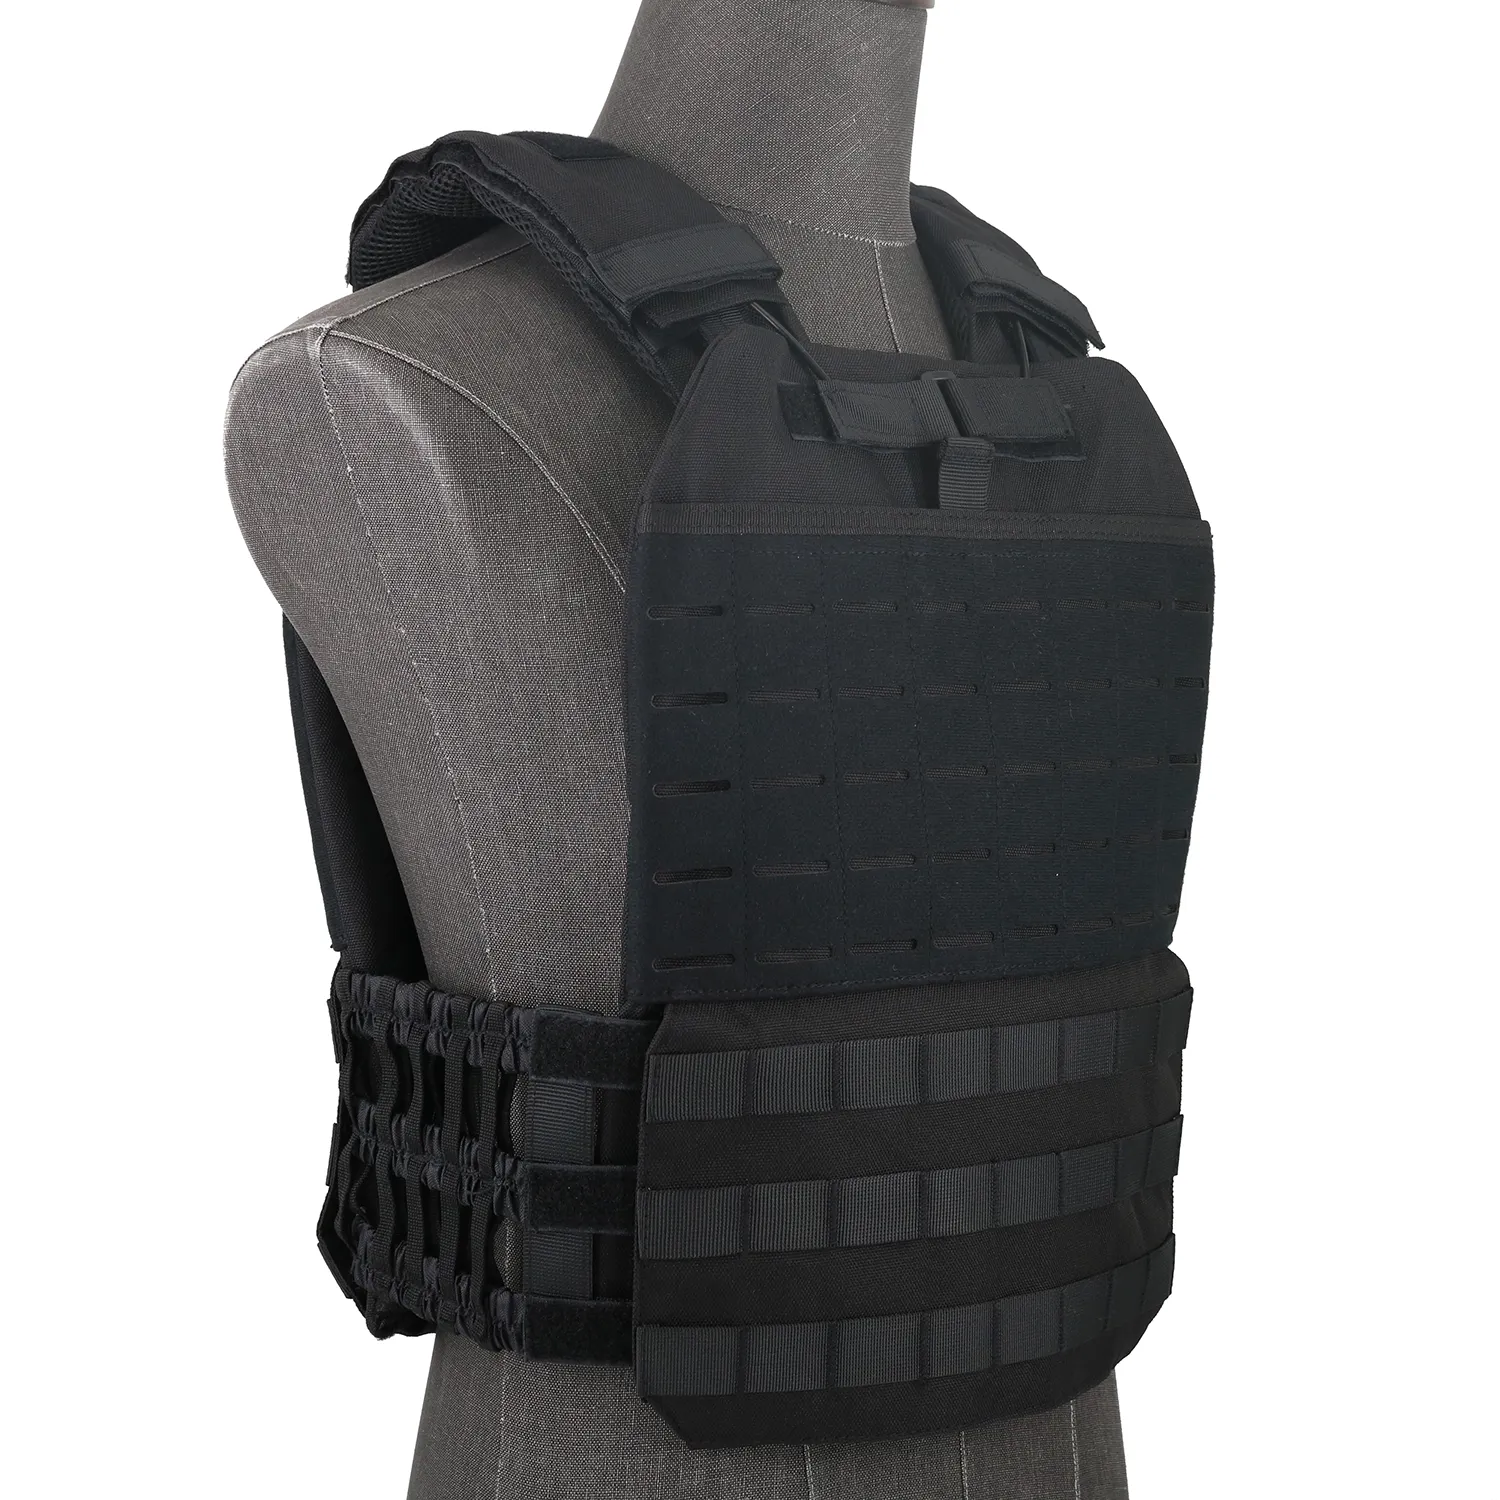 Nylon Quick Release System Durable Molle carrier tactical vest with plate insert bag